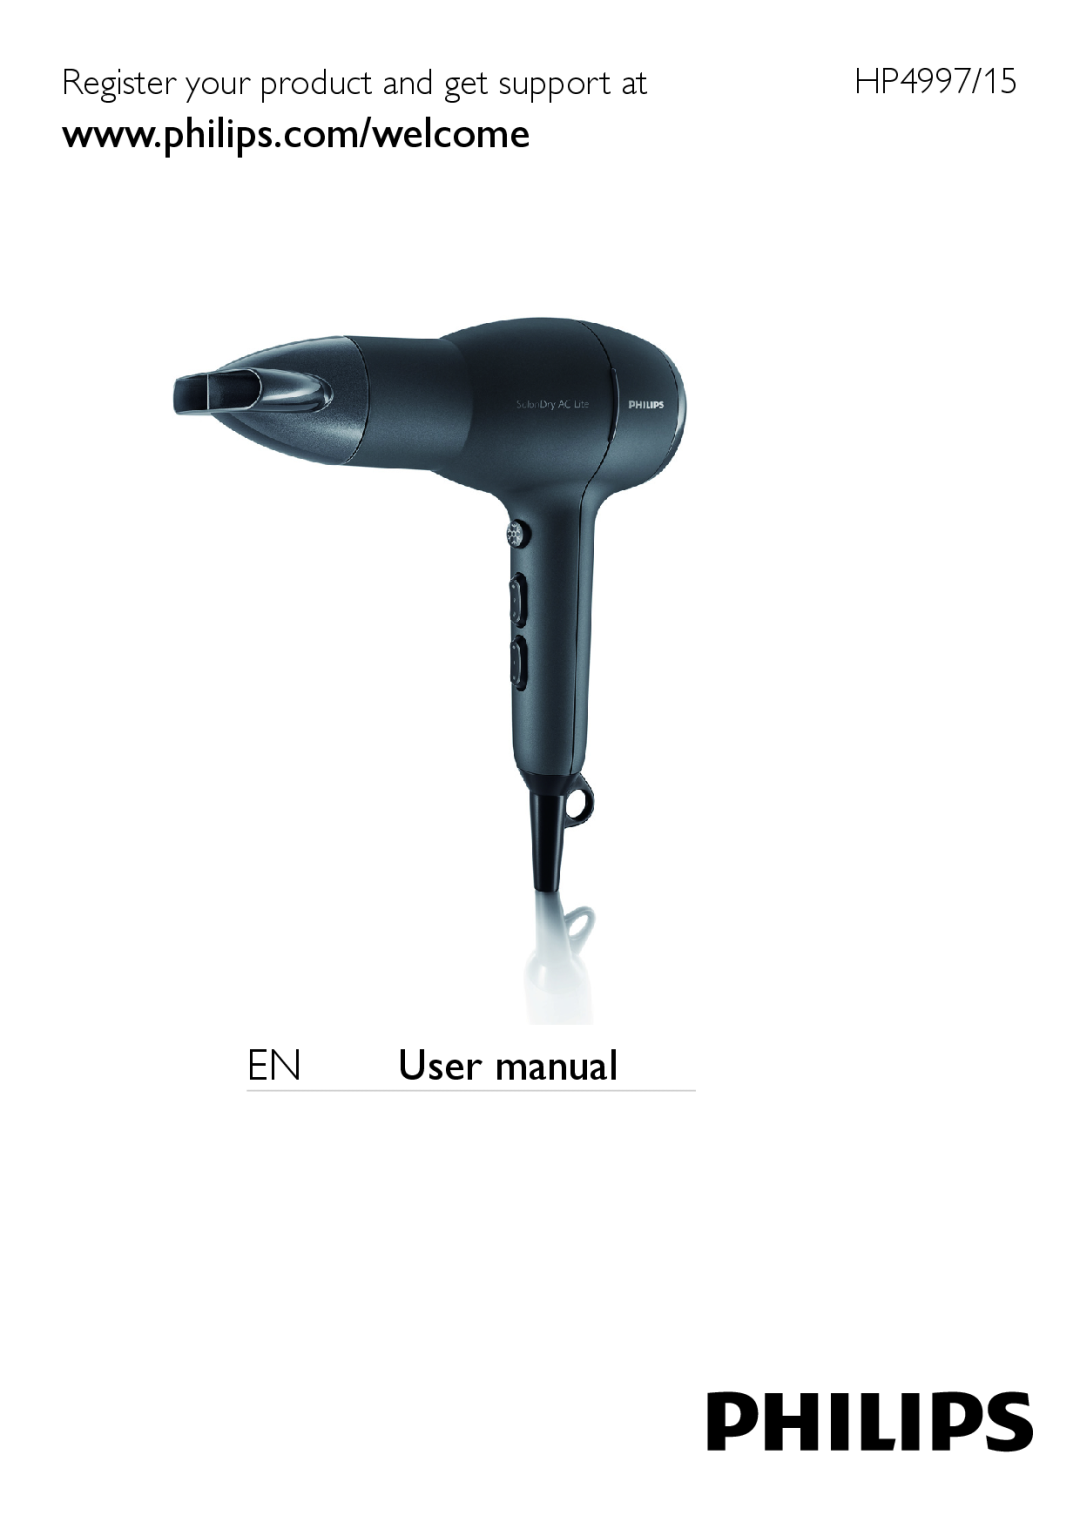 Philips user manual Register your product and get support at, HP4997/15, EN User manual 